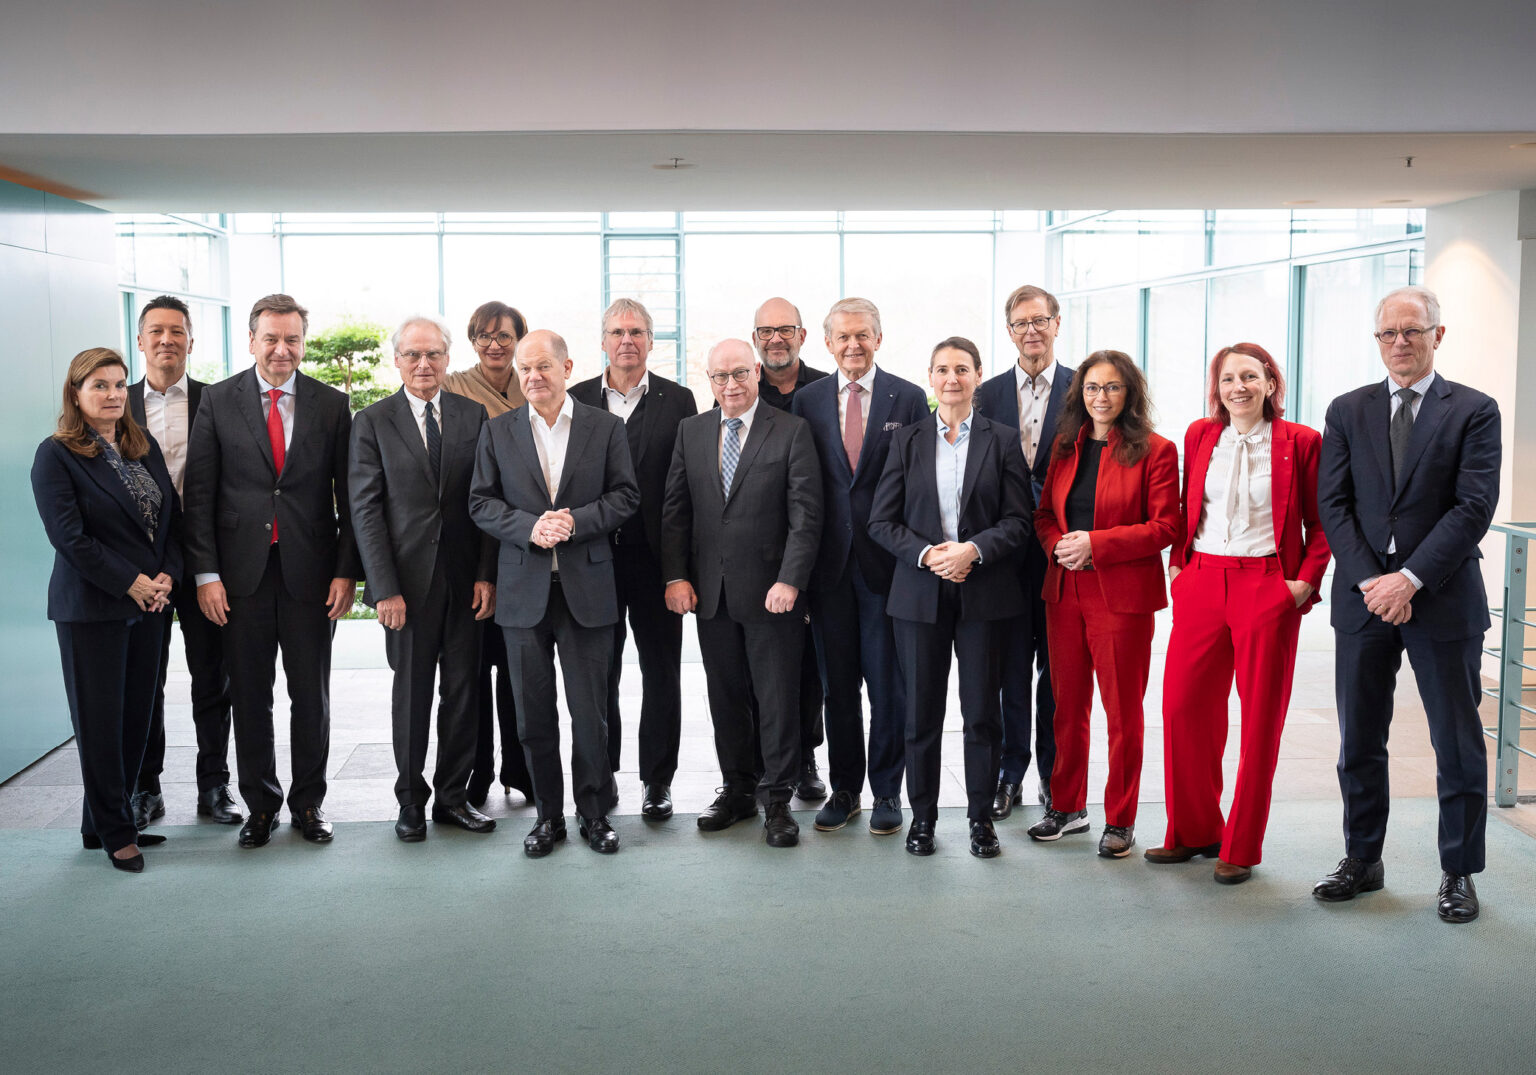 Members of the Future Council of the Federal Chancellor with Federal Chancellor Olaf Scholz